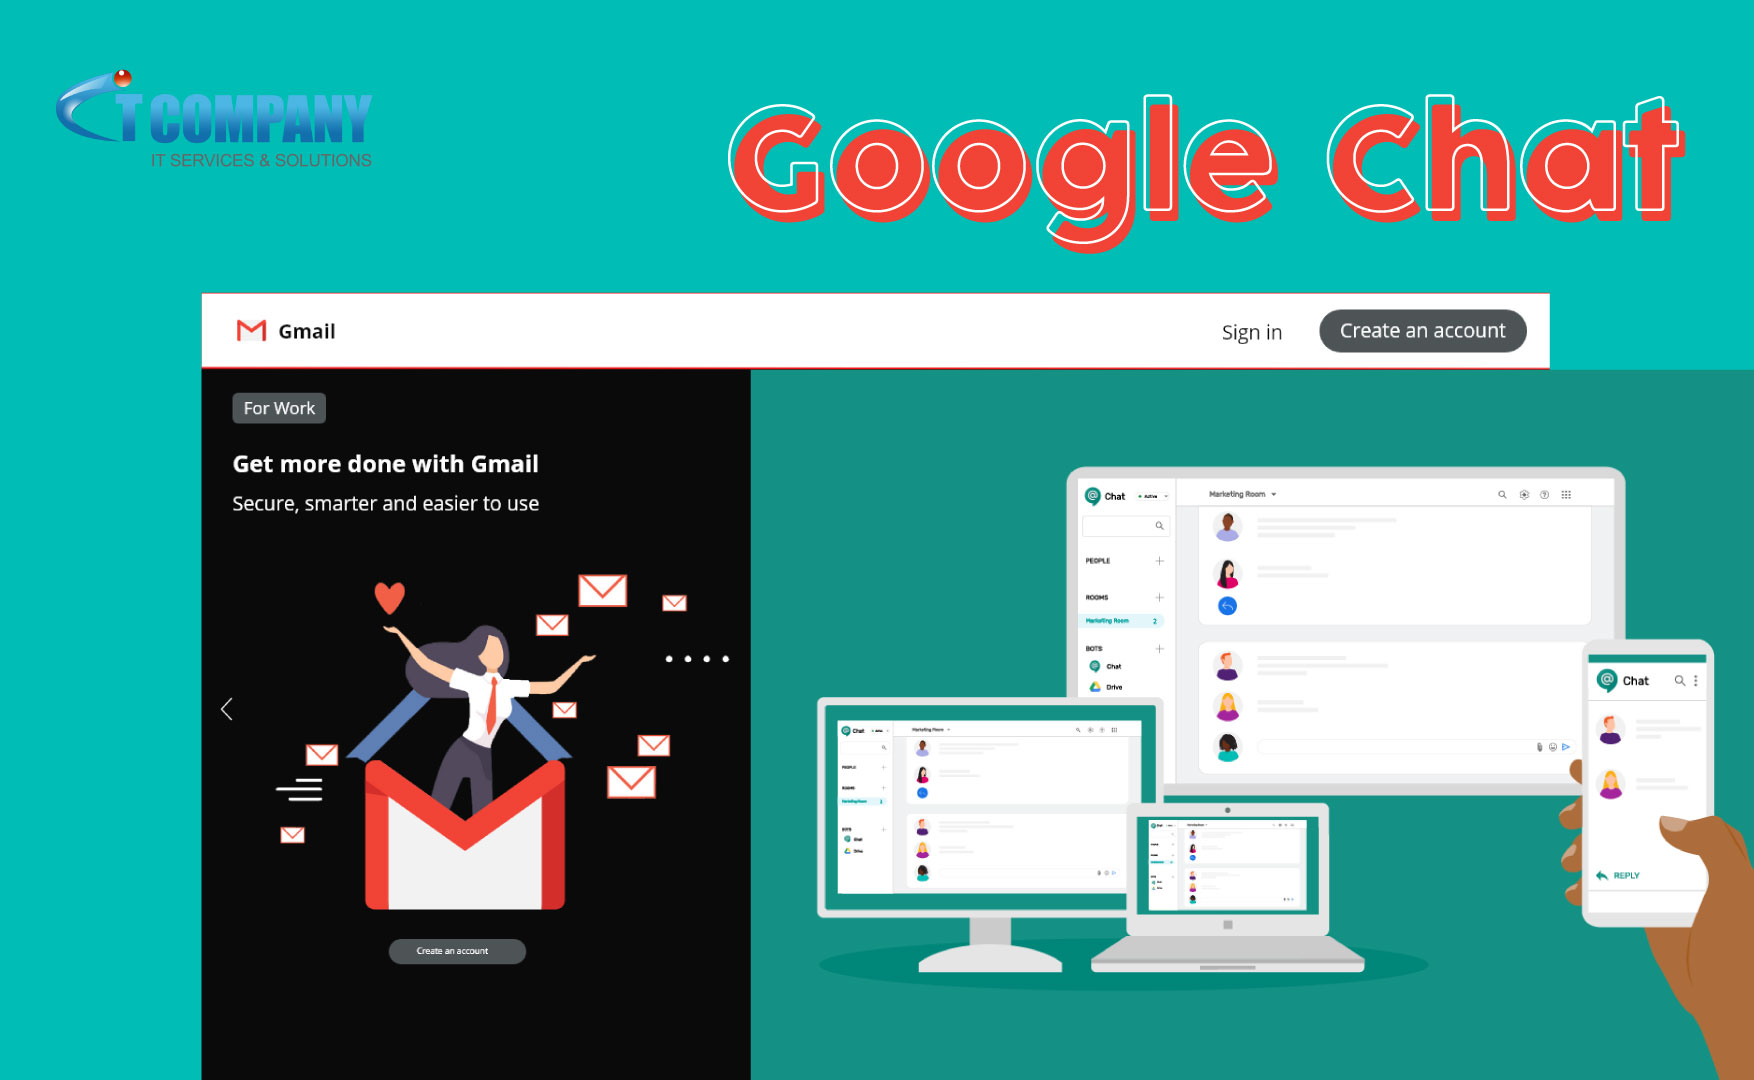 Everyone will be able to use Google’s unified Gmail interface (together with Google Chat)